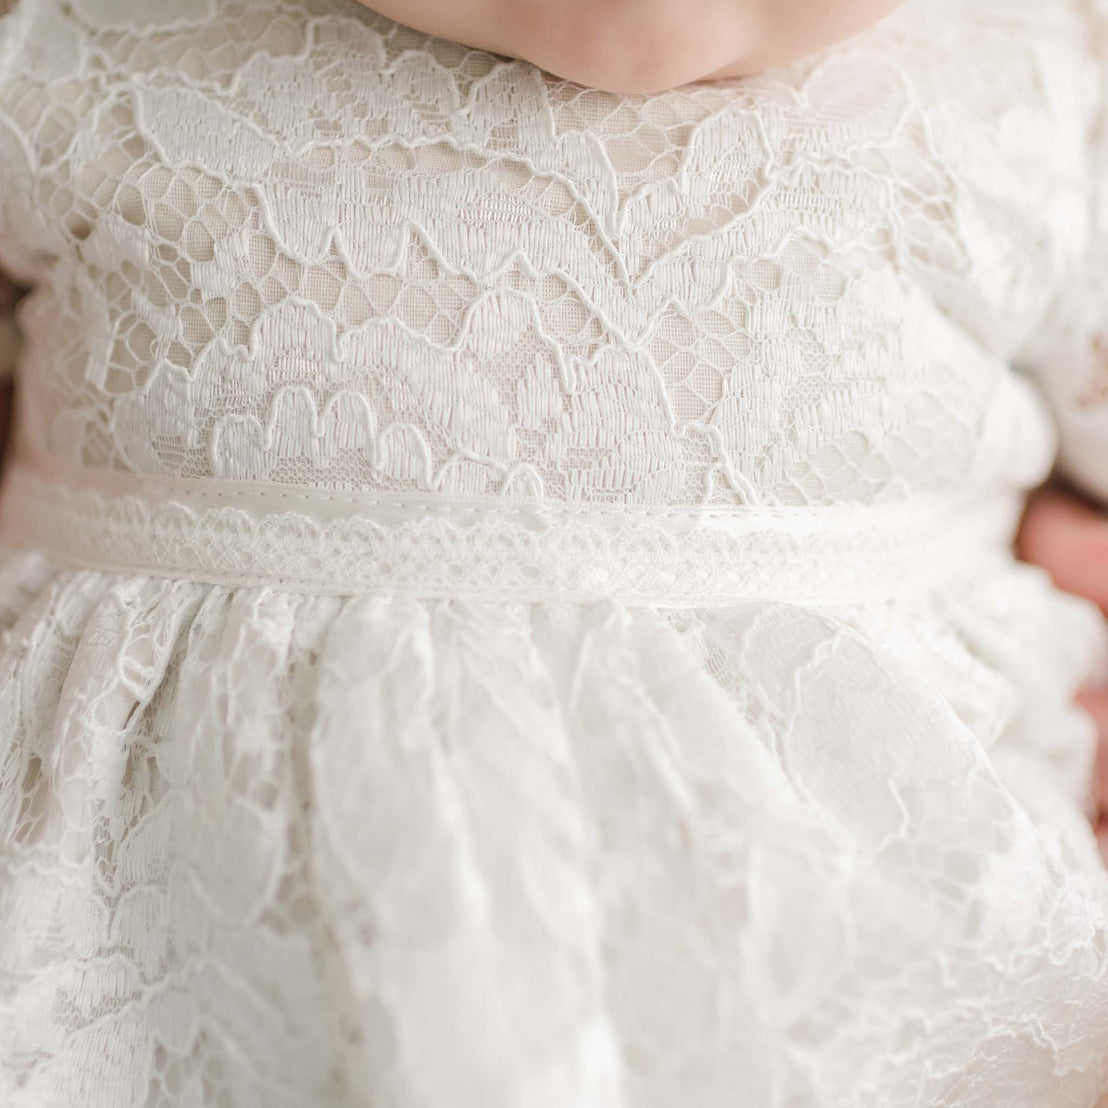 Close-up of a baby in the Rose Romper Dress, focusing on the detail of the lace and the stitching around the waistline. The texture of the lace is prominently featured.